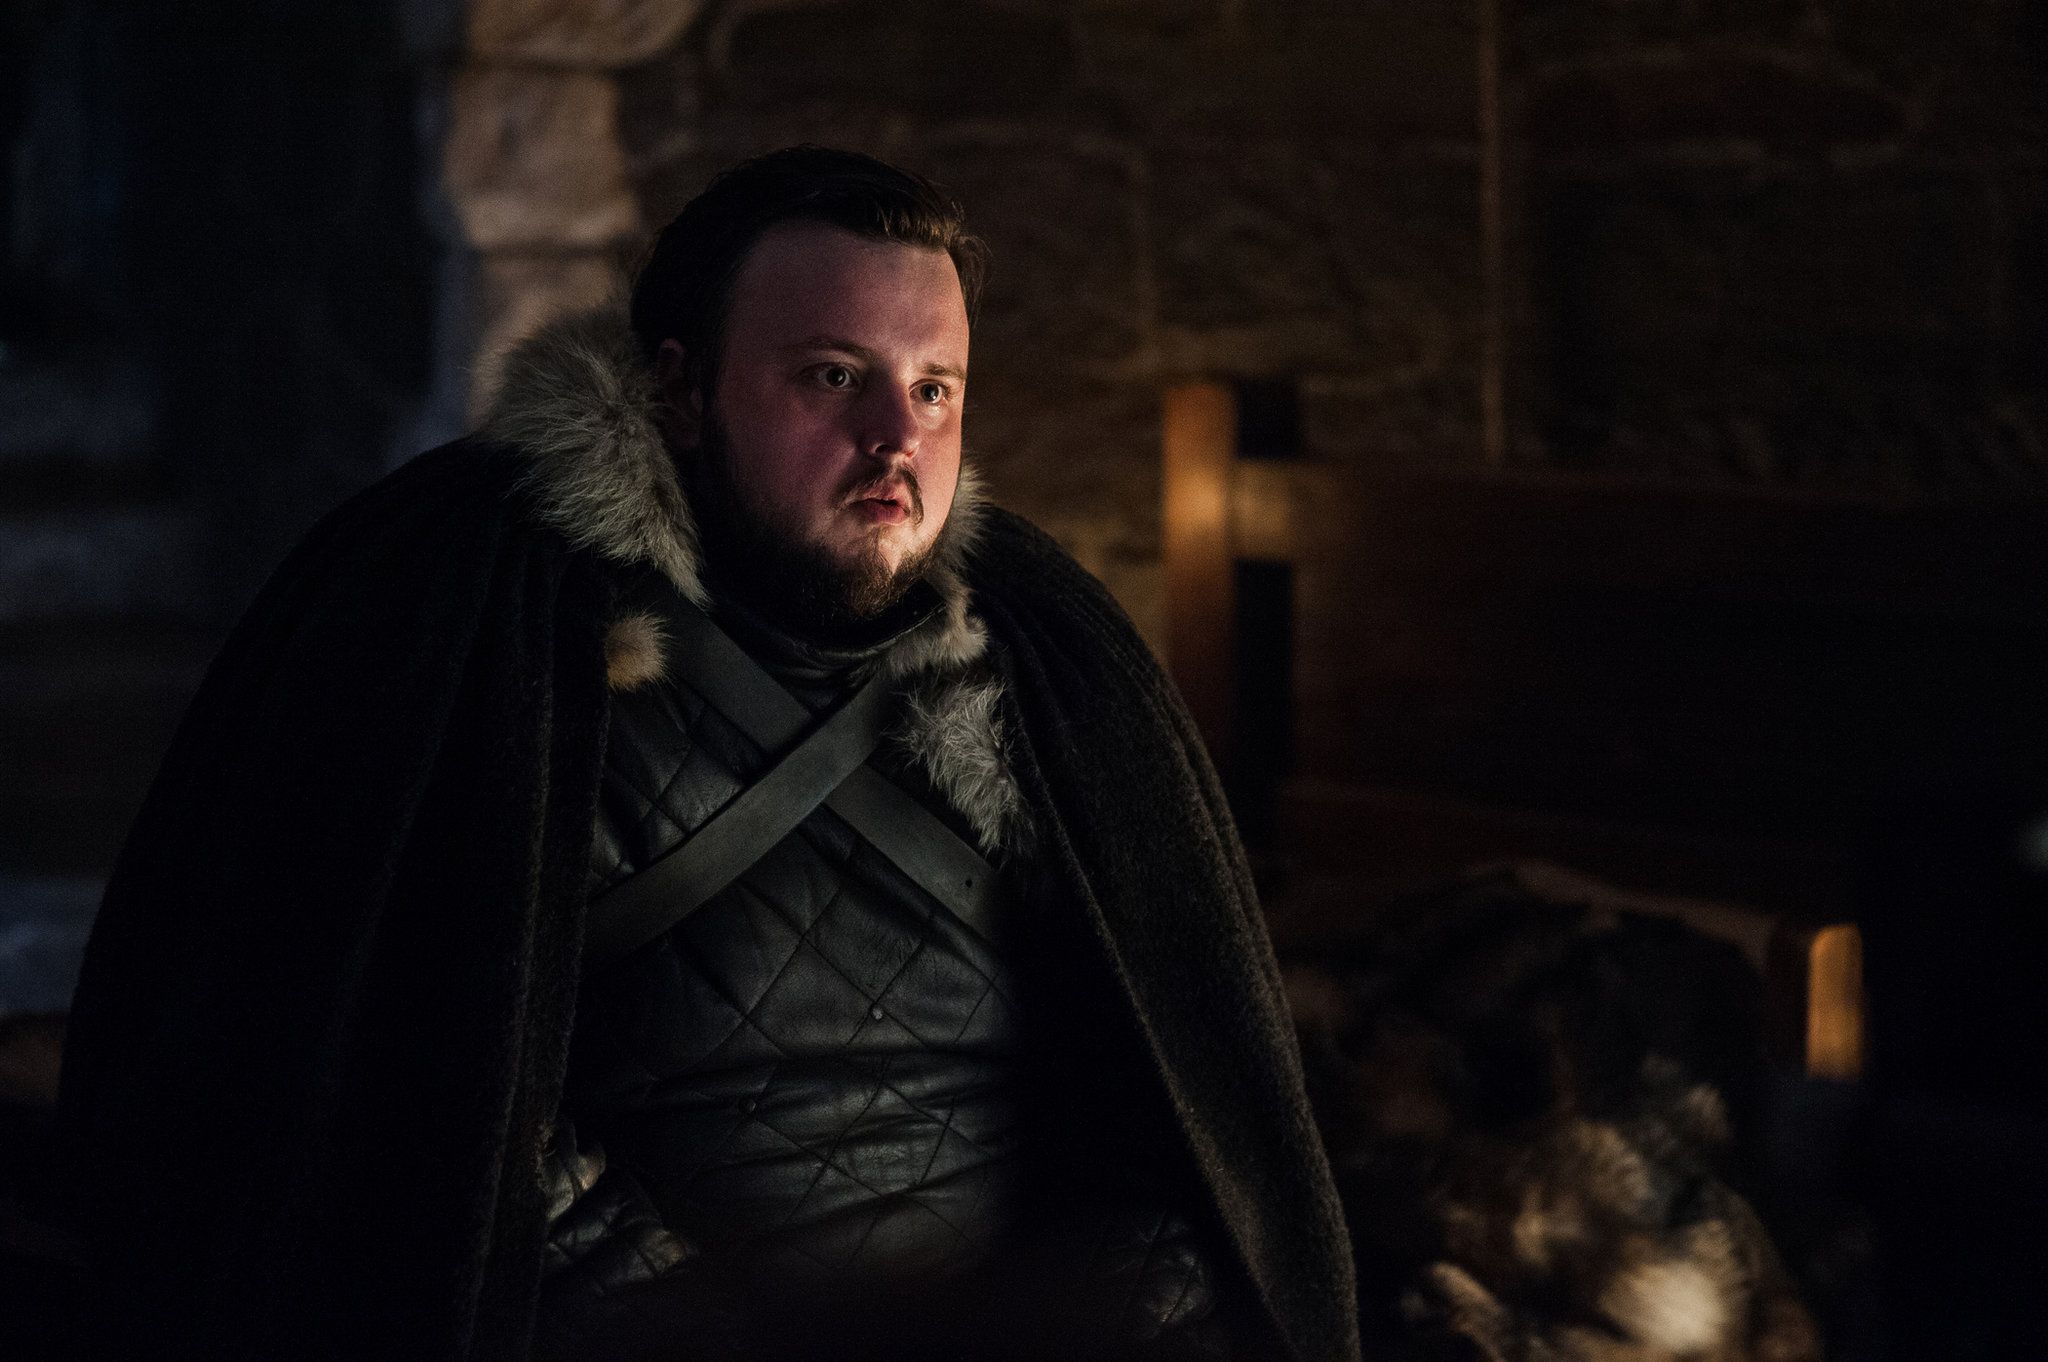 Actor John Bradley From 'Game of Thrones' on Whether White Walkers